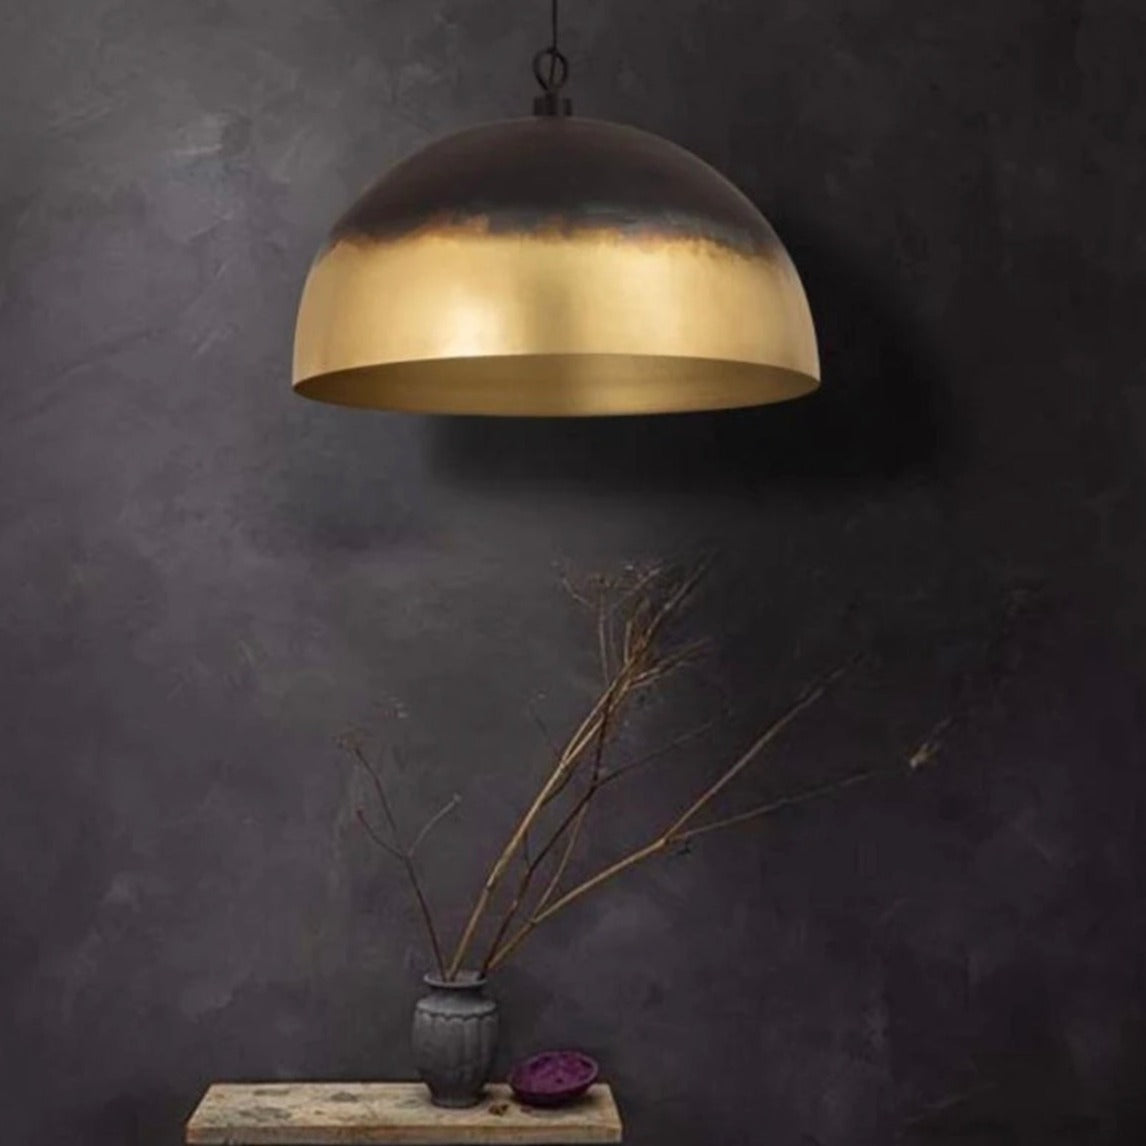 Brass Dome Light Fixture,Black With Gold Brass - Ref.1816